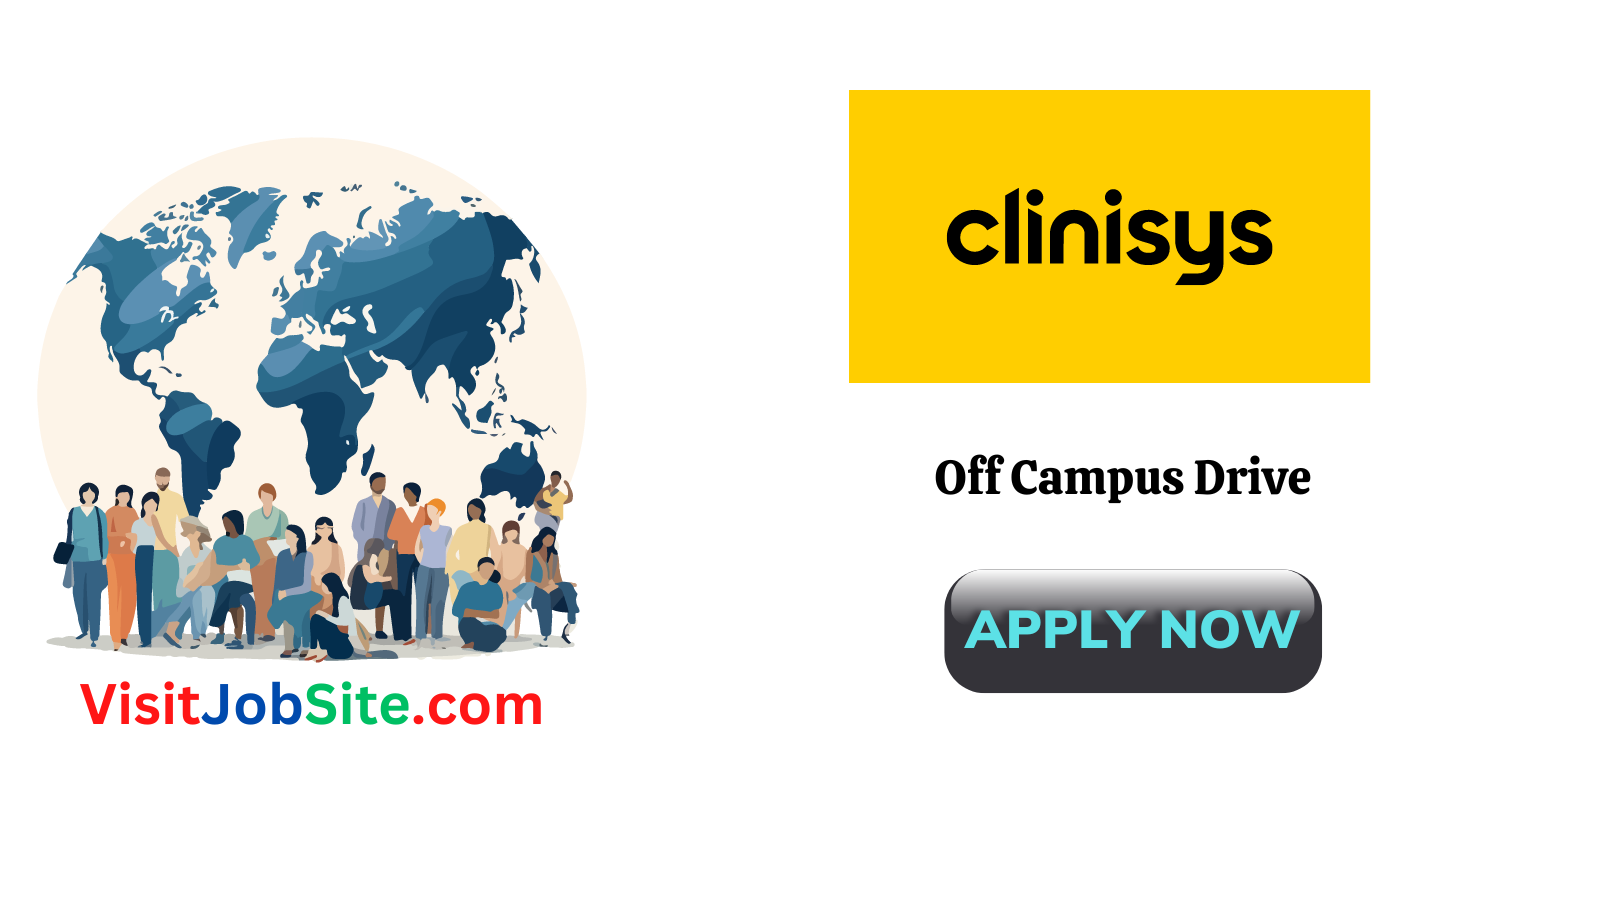 Clinisys Off Campus Drive